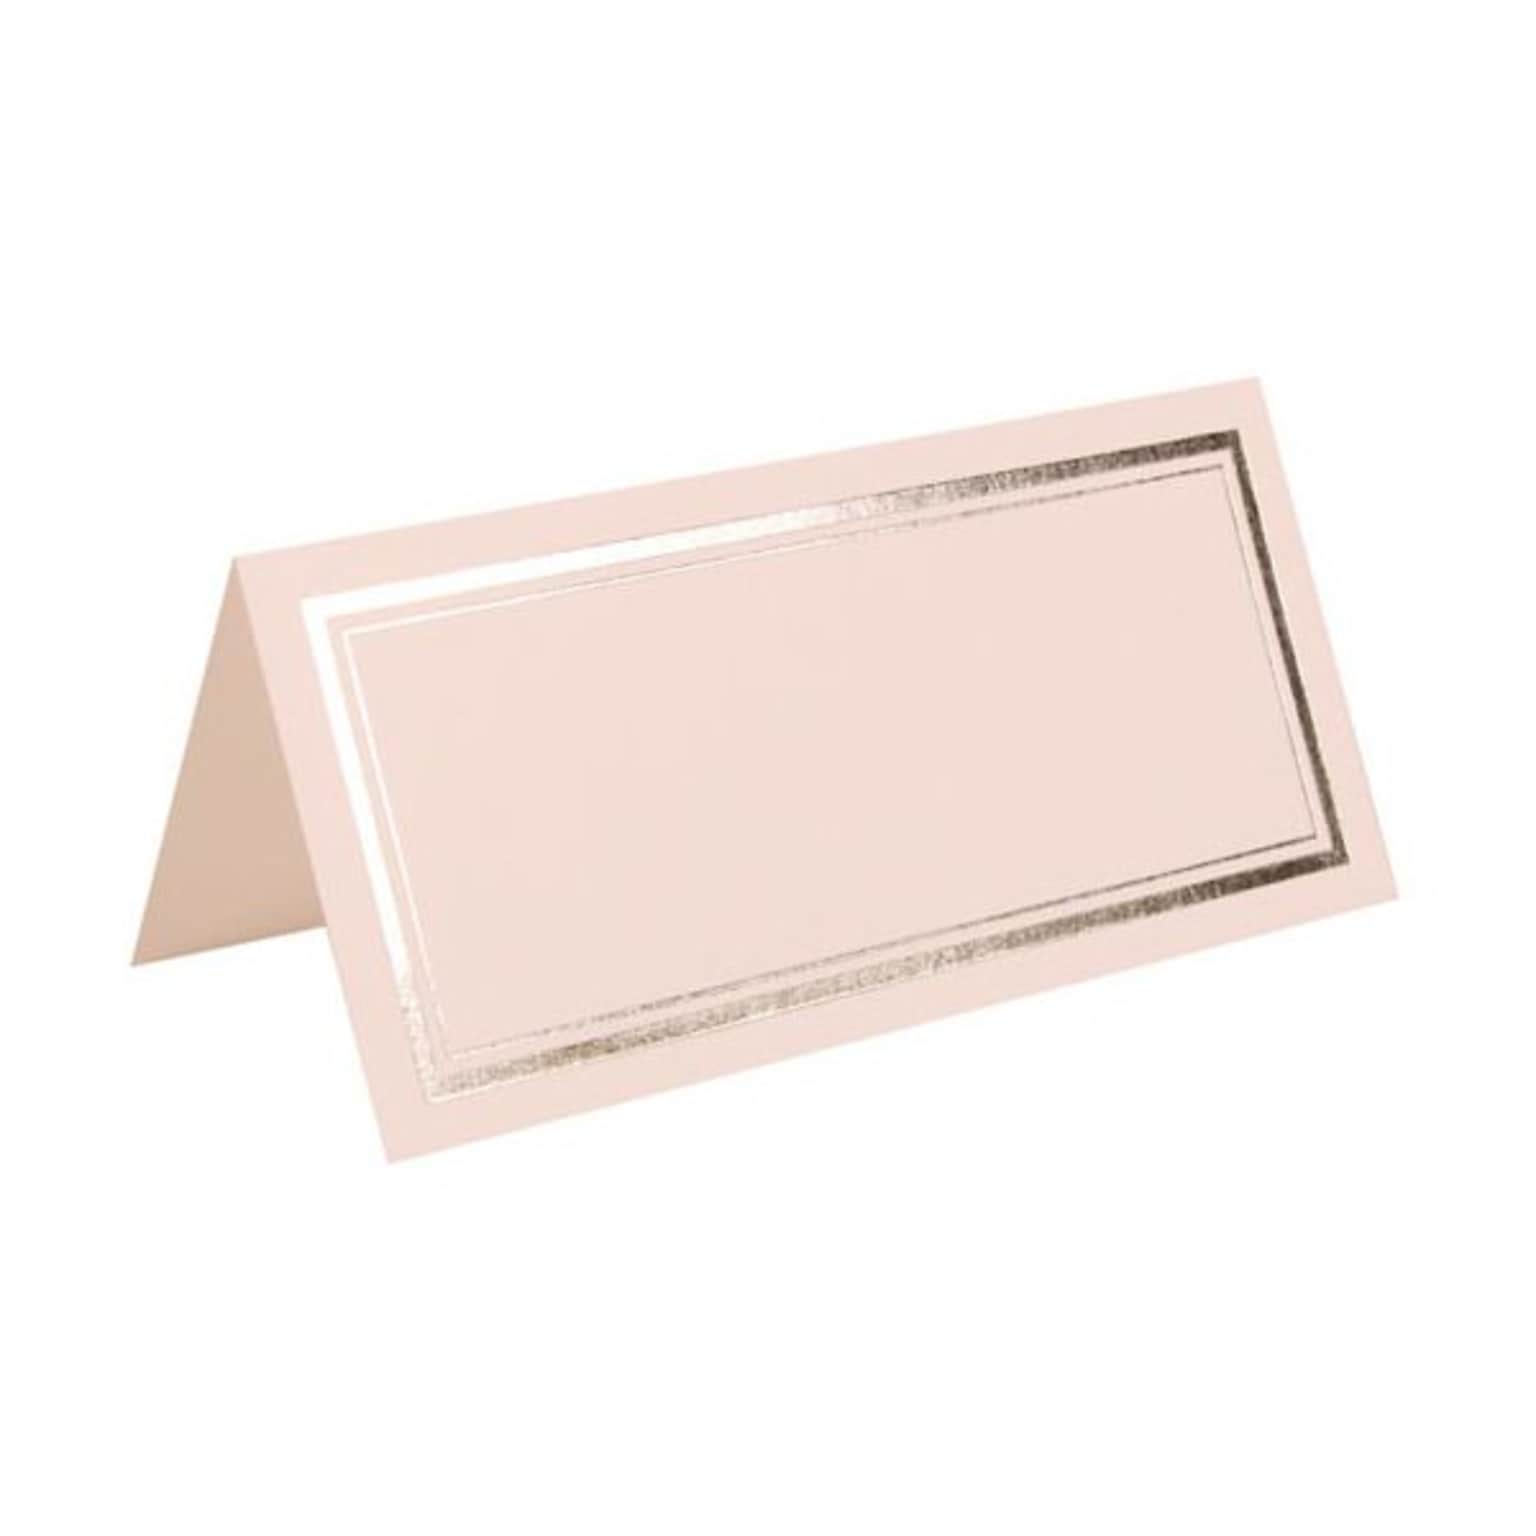 JAM Paper® Foldover Placecards, 2 x 4.25, White with Double Silver Border place cards, 100/pack (312125230)